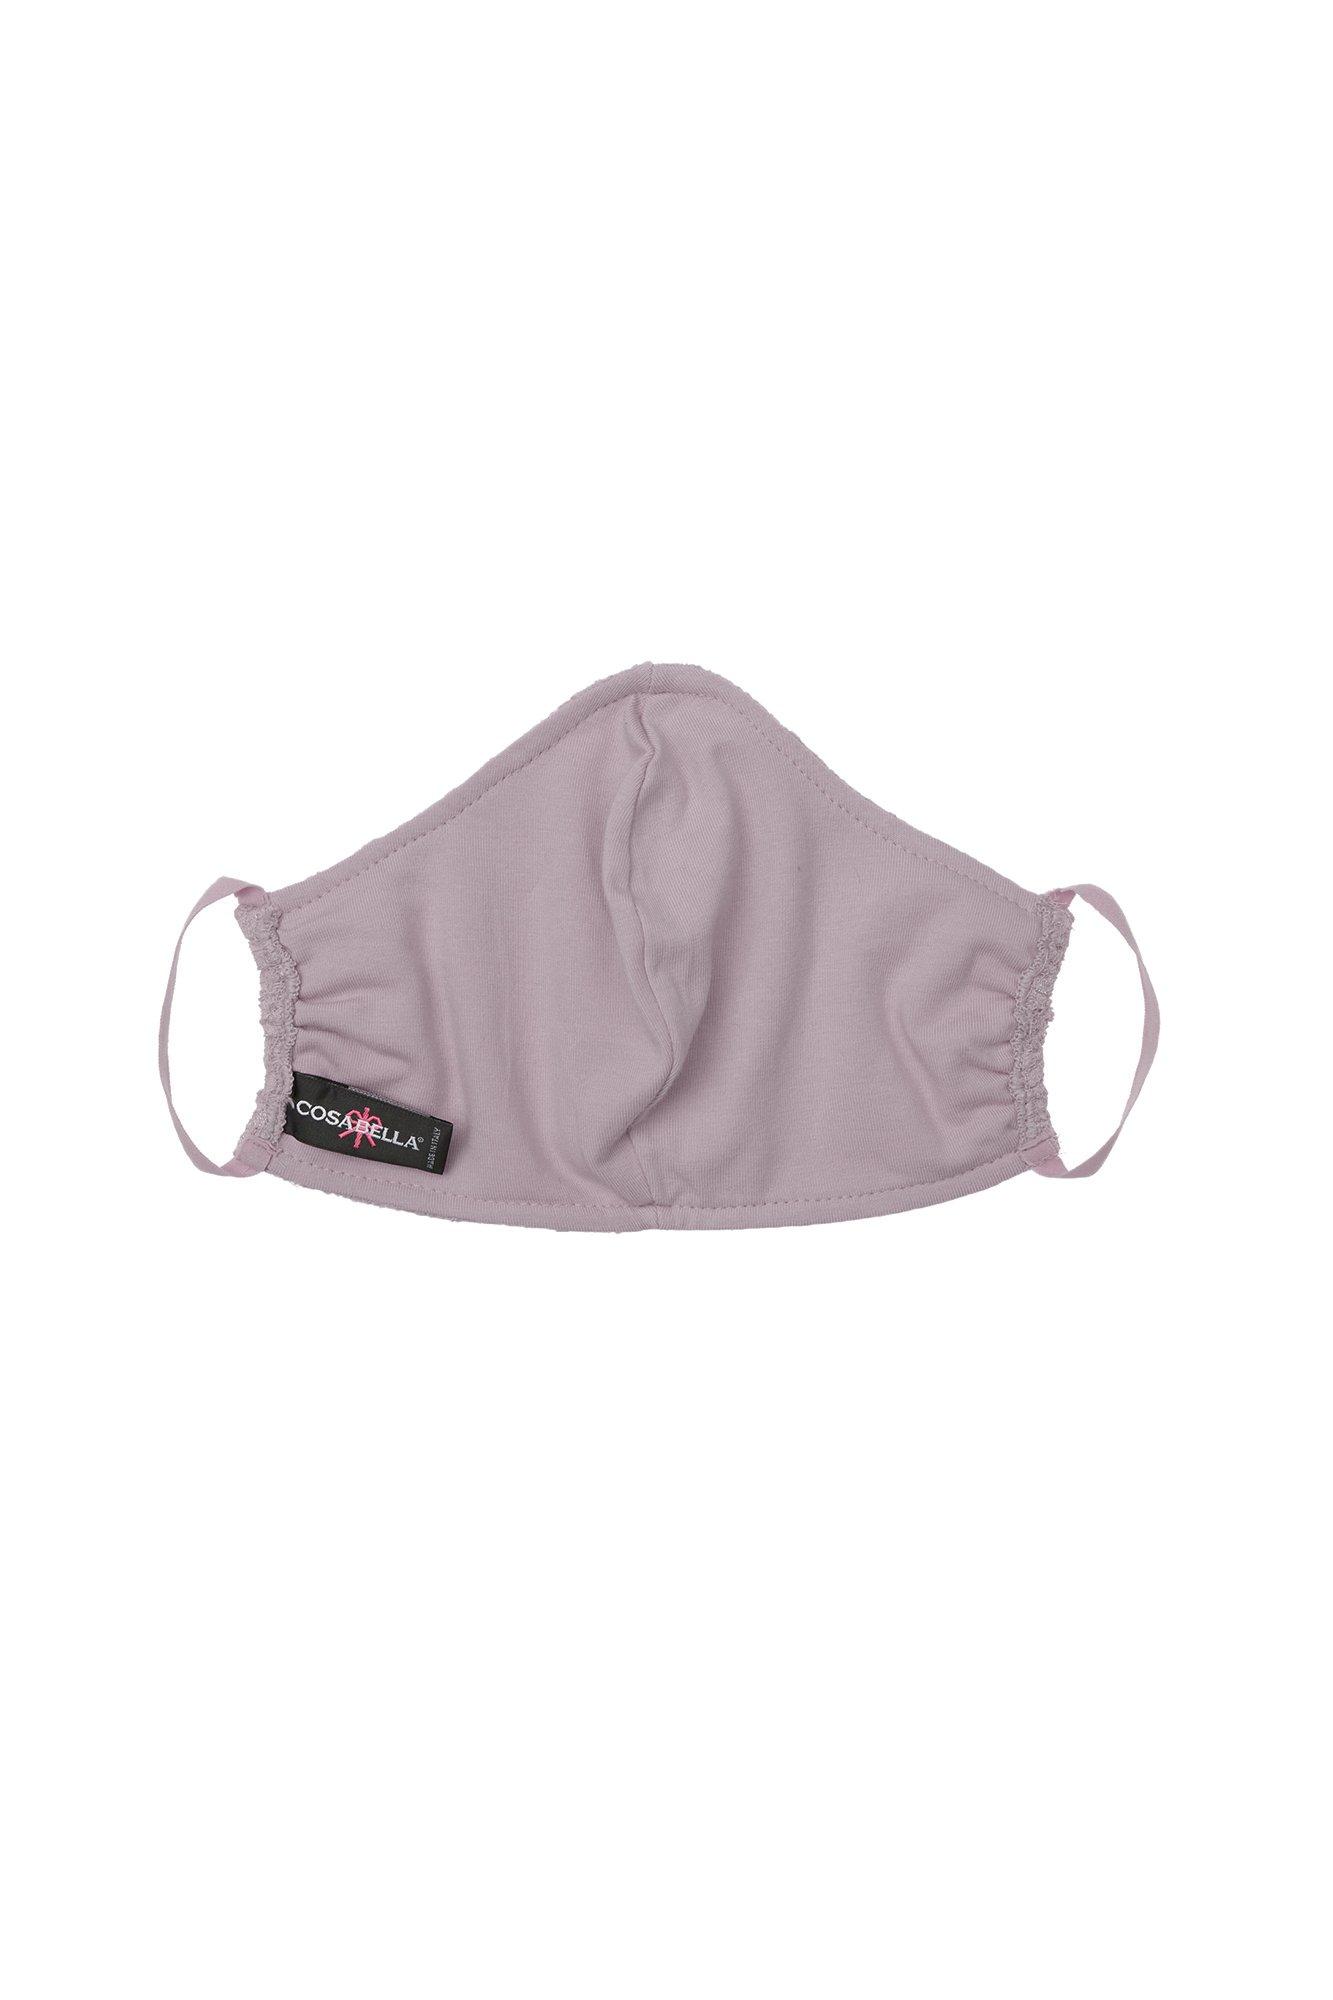 Cosabella Synthetic V Face Mask in Dusty Mauve (Purple) - Lyst